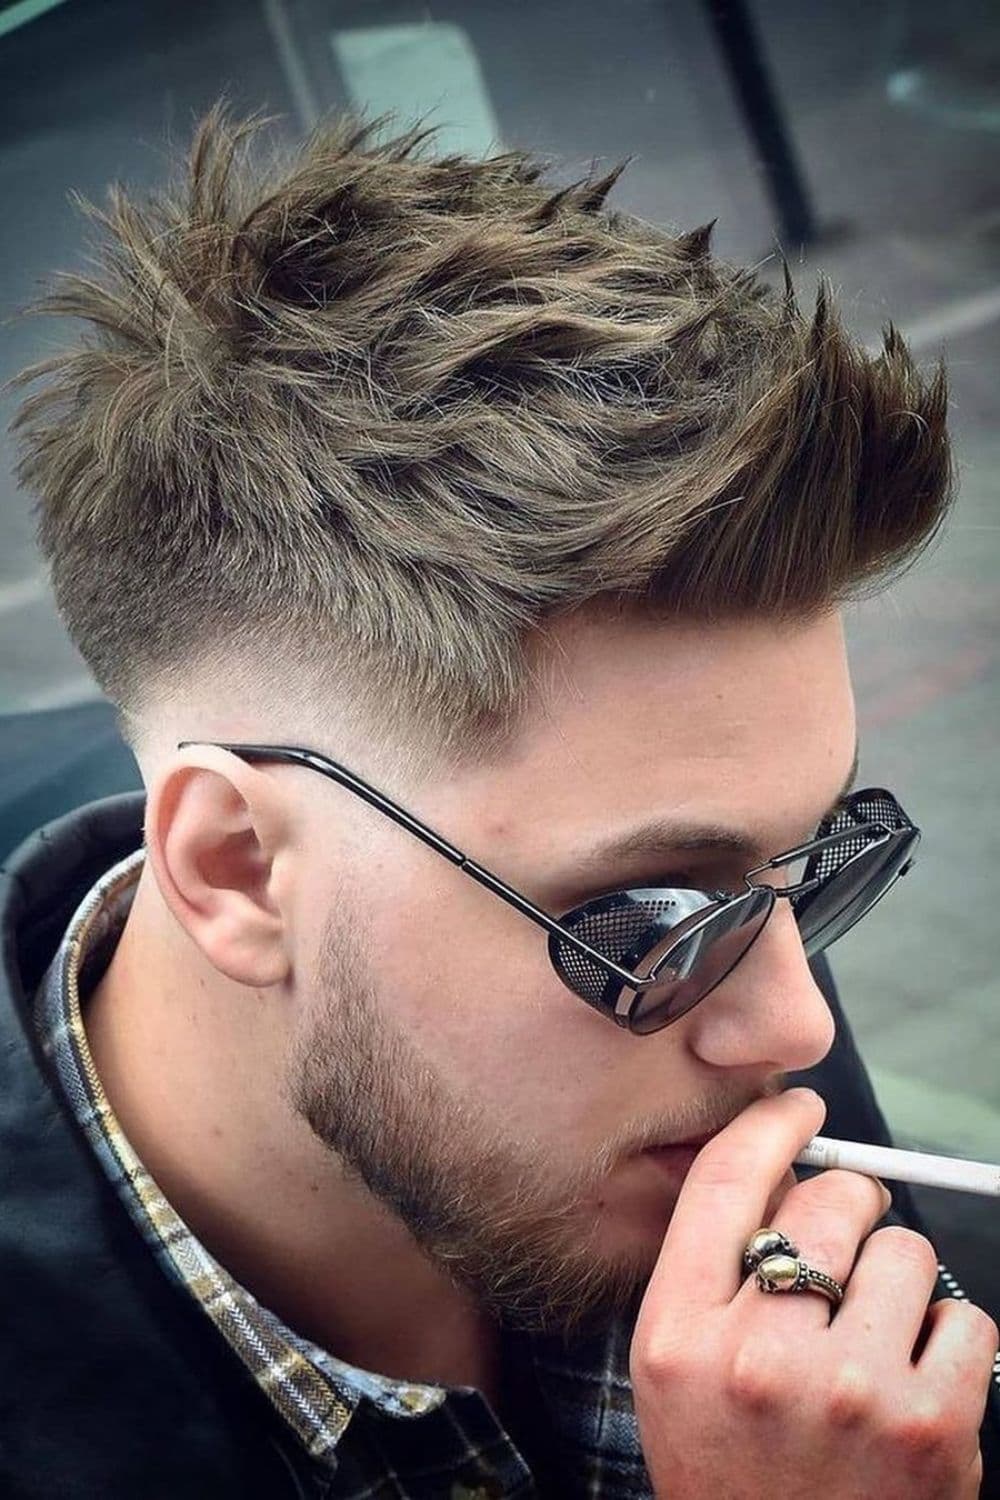 A man with spiky low taper fade and wearing sunglasses is holding a cigarette.